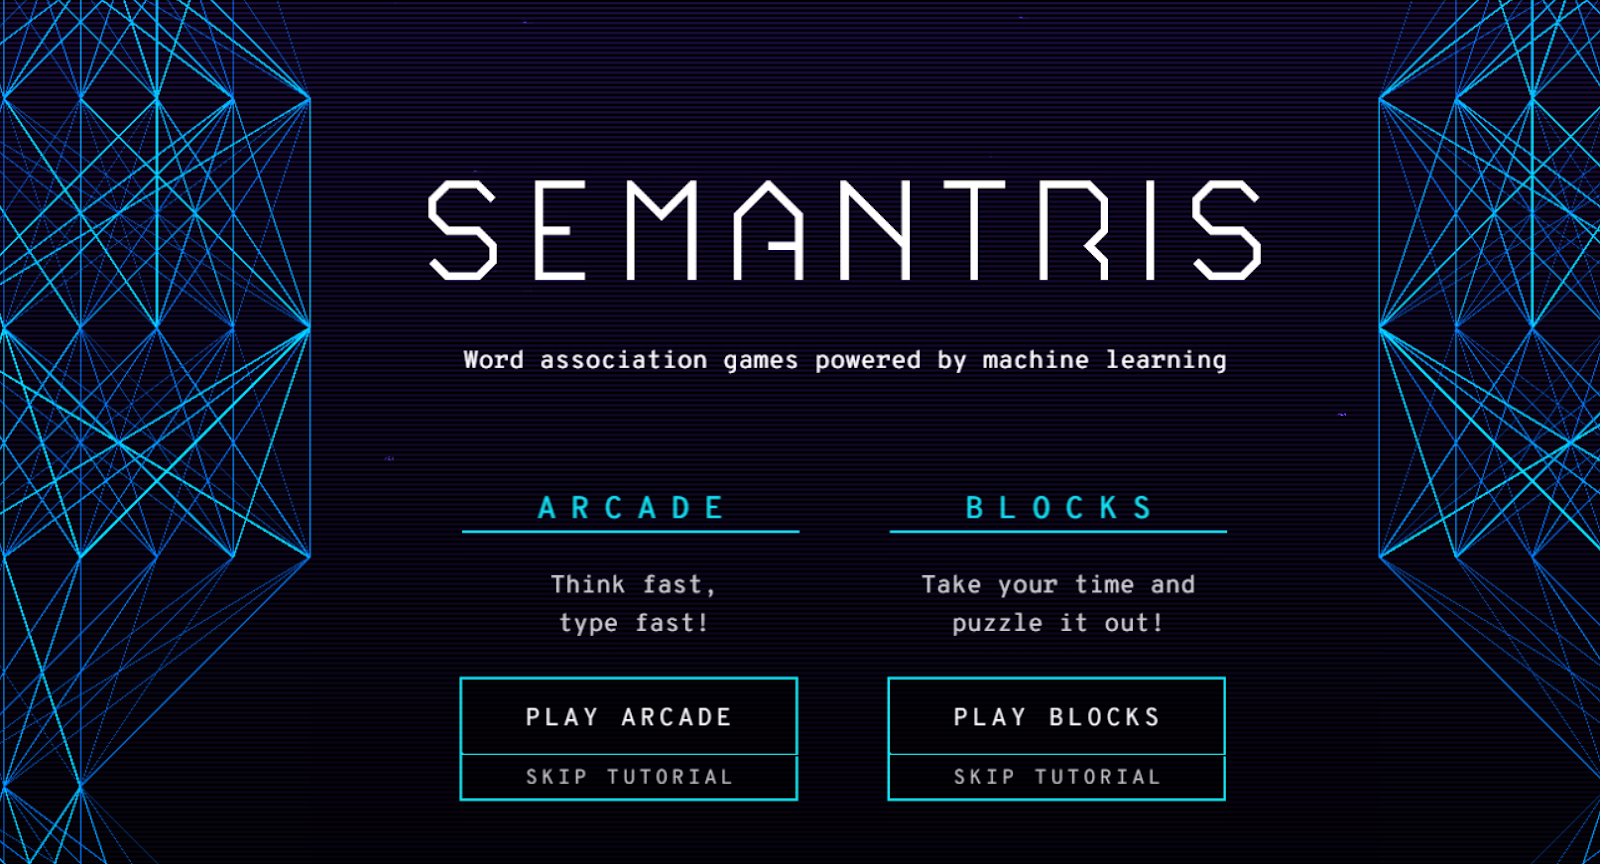 The techno looking home screen of Semantris. 